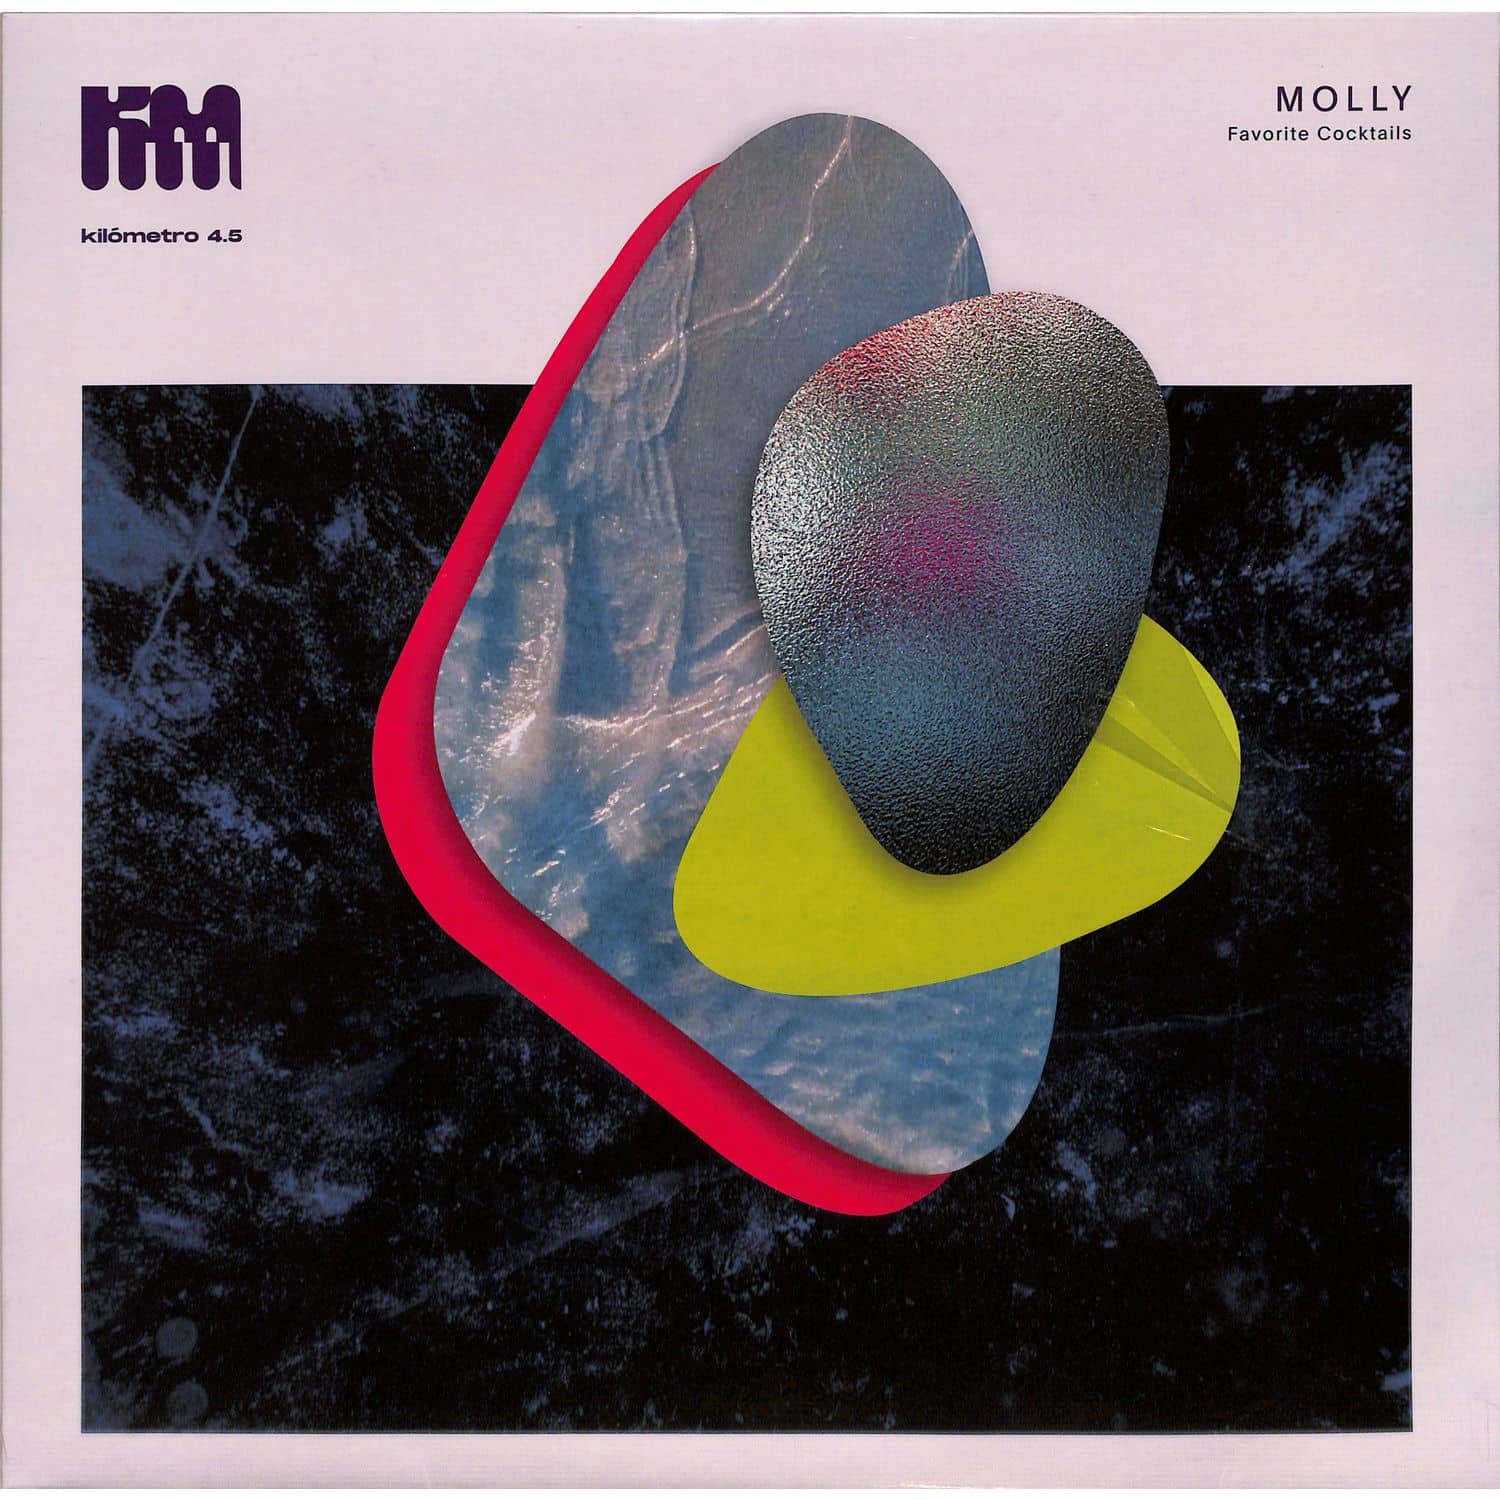 Molly - FAVORITE COCKTAILS